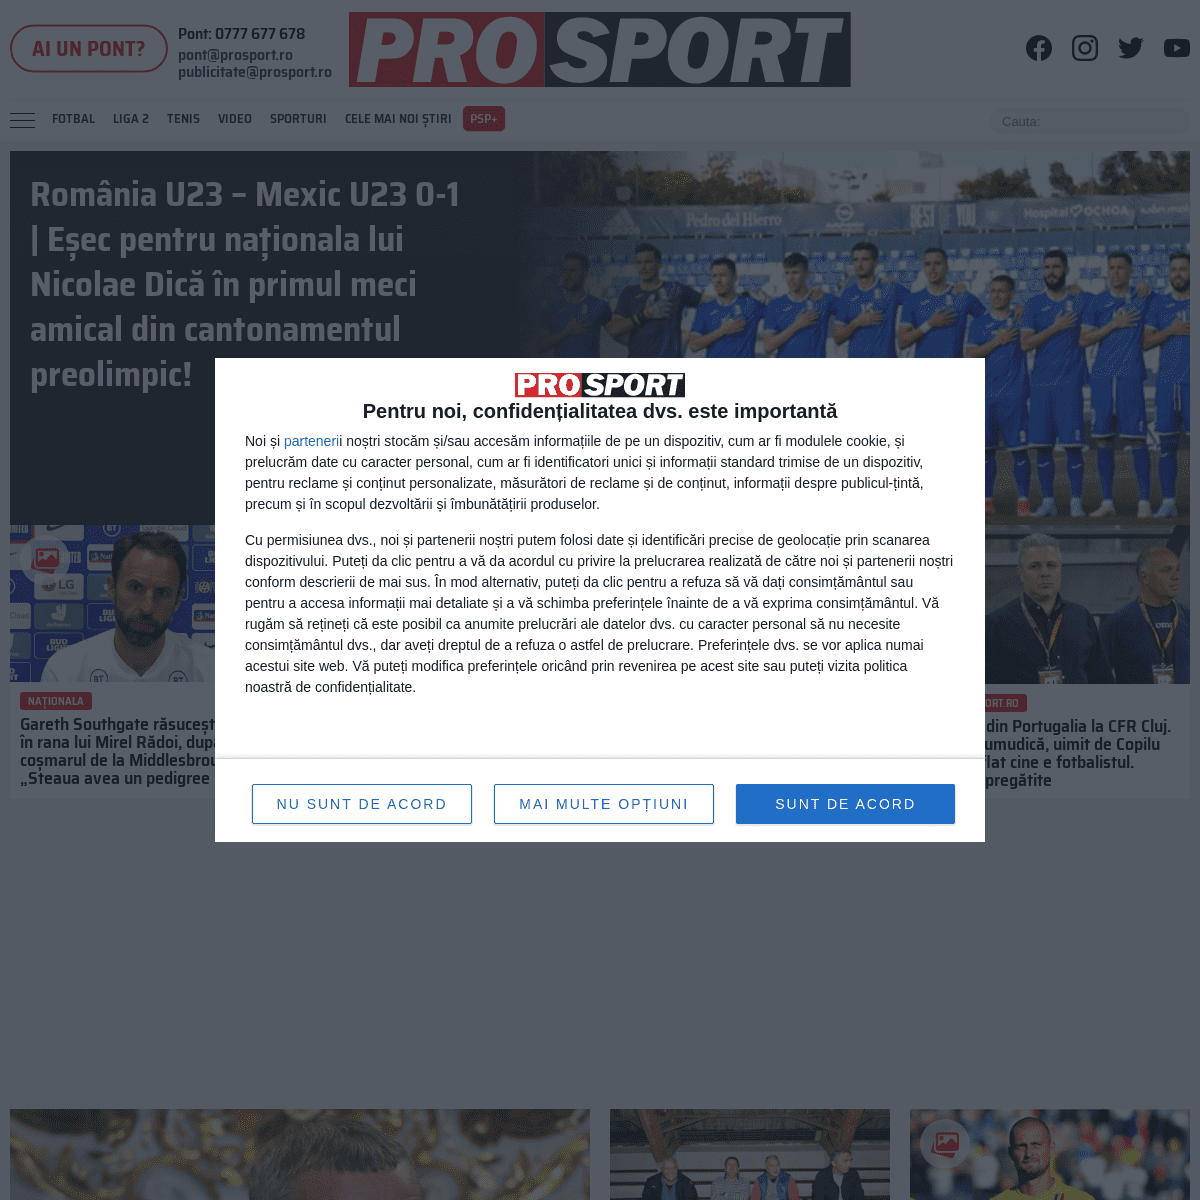 A complete backup of https://prosport.ro